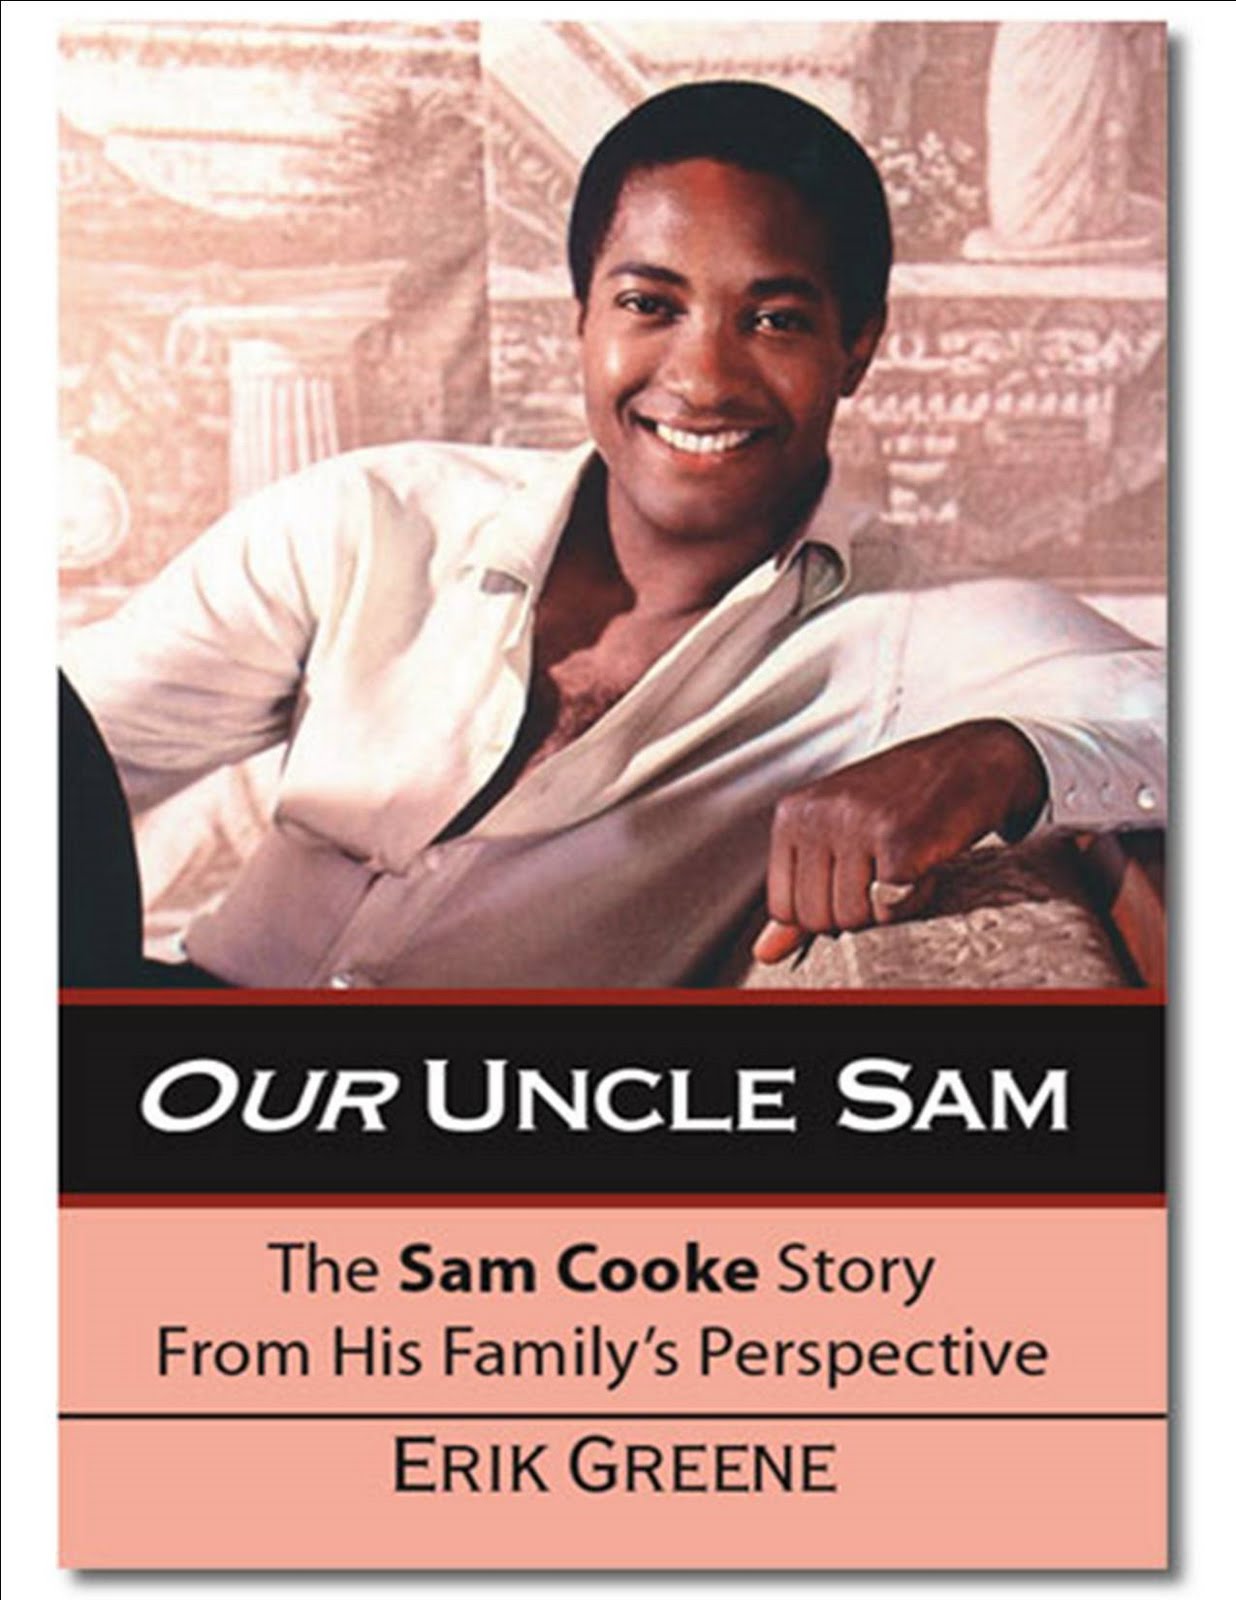 [Our_Uncle_Sam_Cover.jpg]